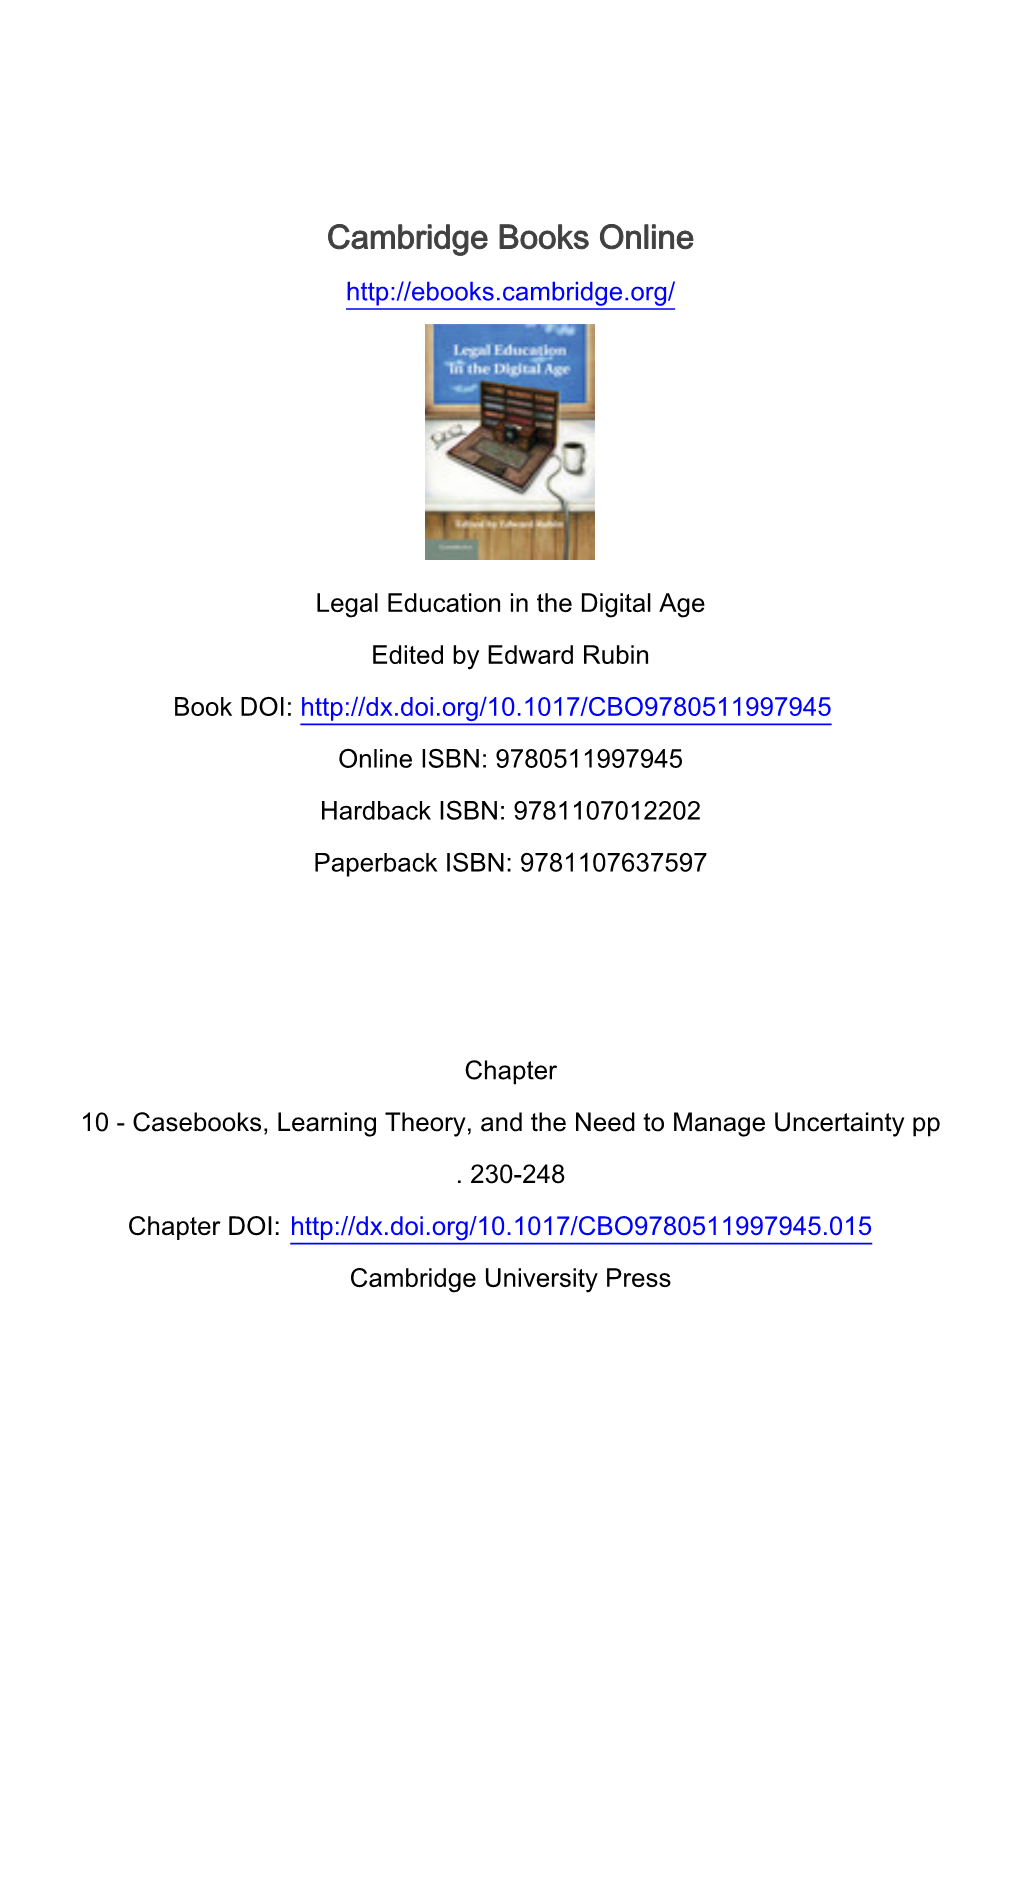 Casebooks, Learning Theory, and the Need to Manage Uncertainty Pp